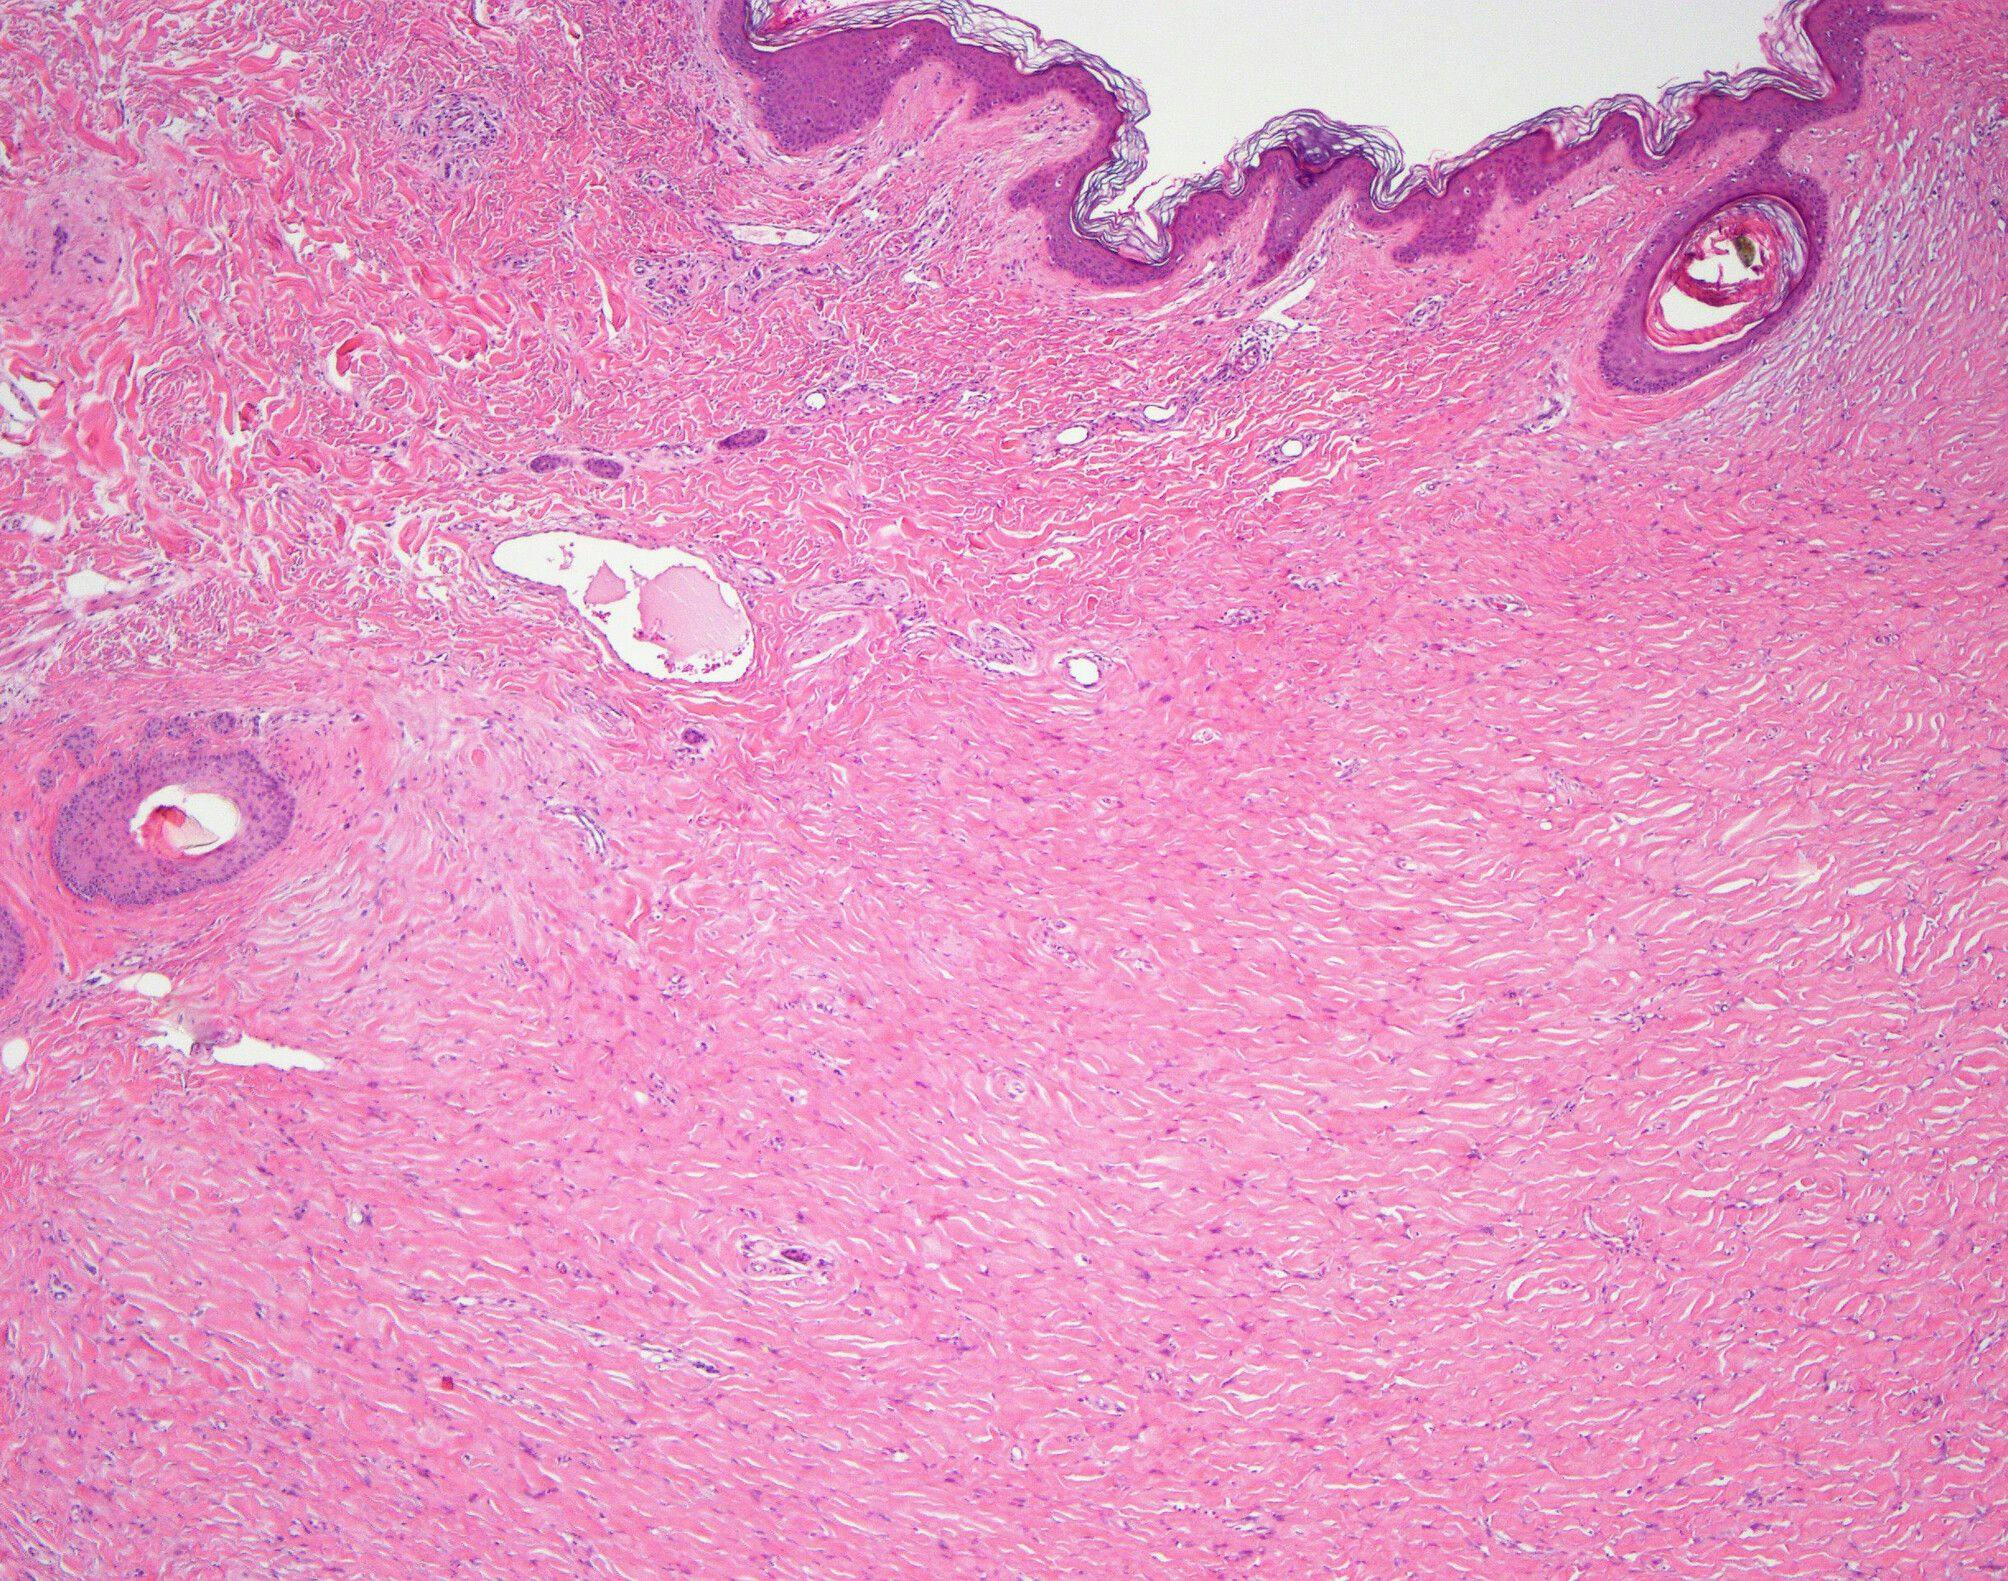 Case Study Reports Multiple Giant Cell Collagenomas Associated With Cowden Syndrome